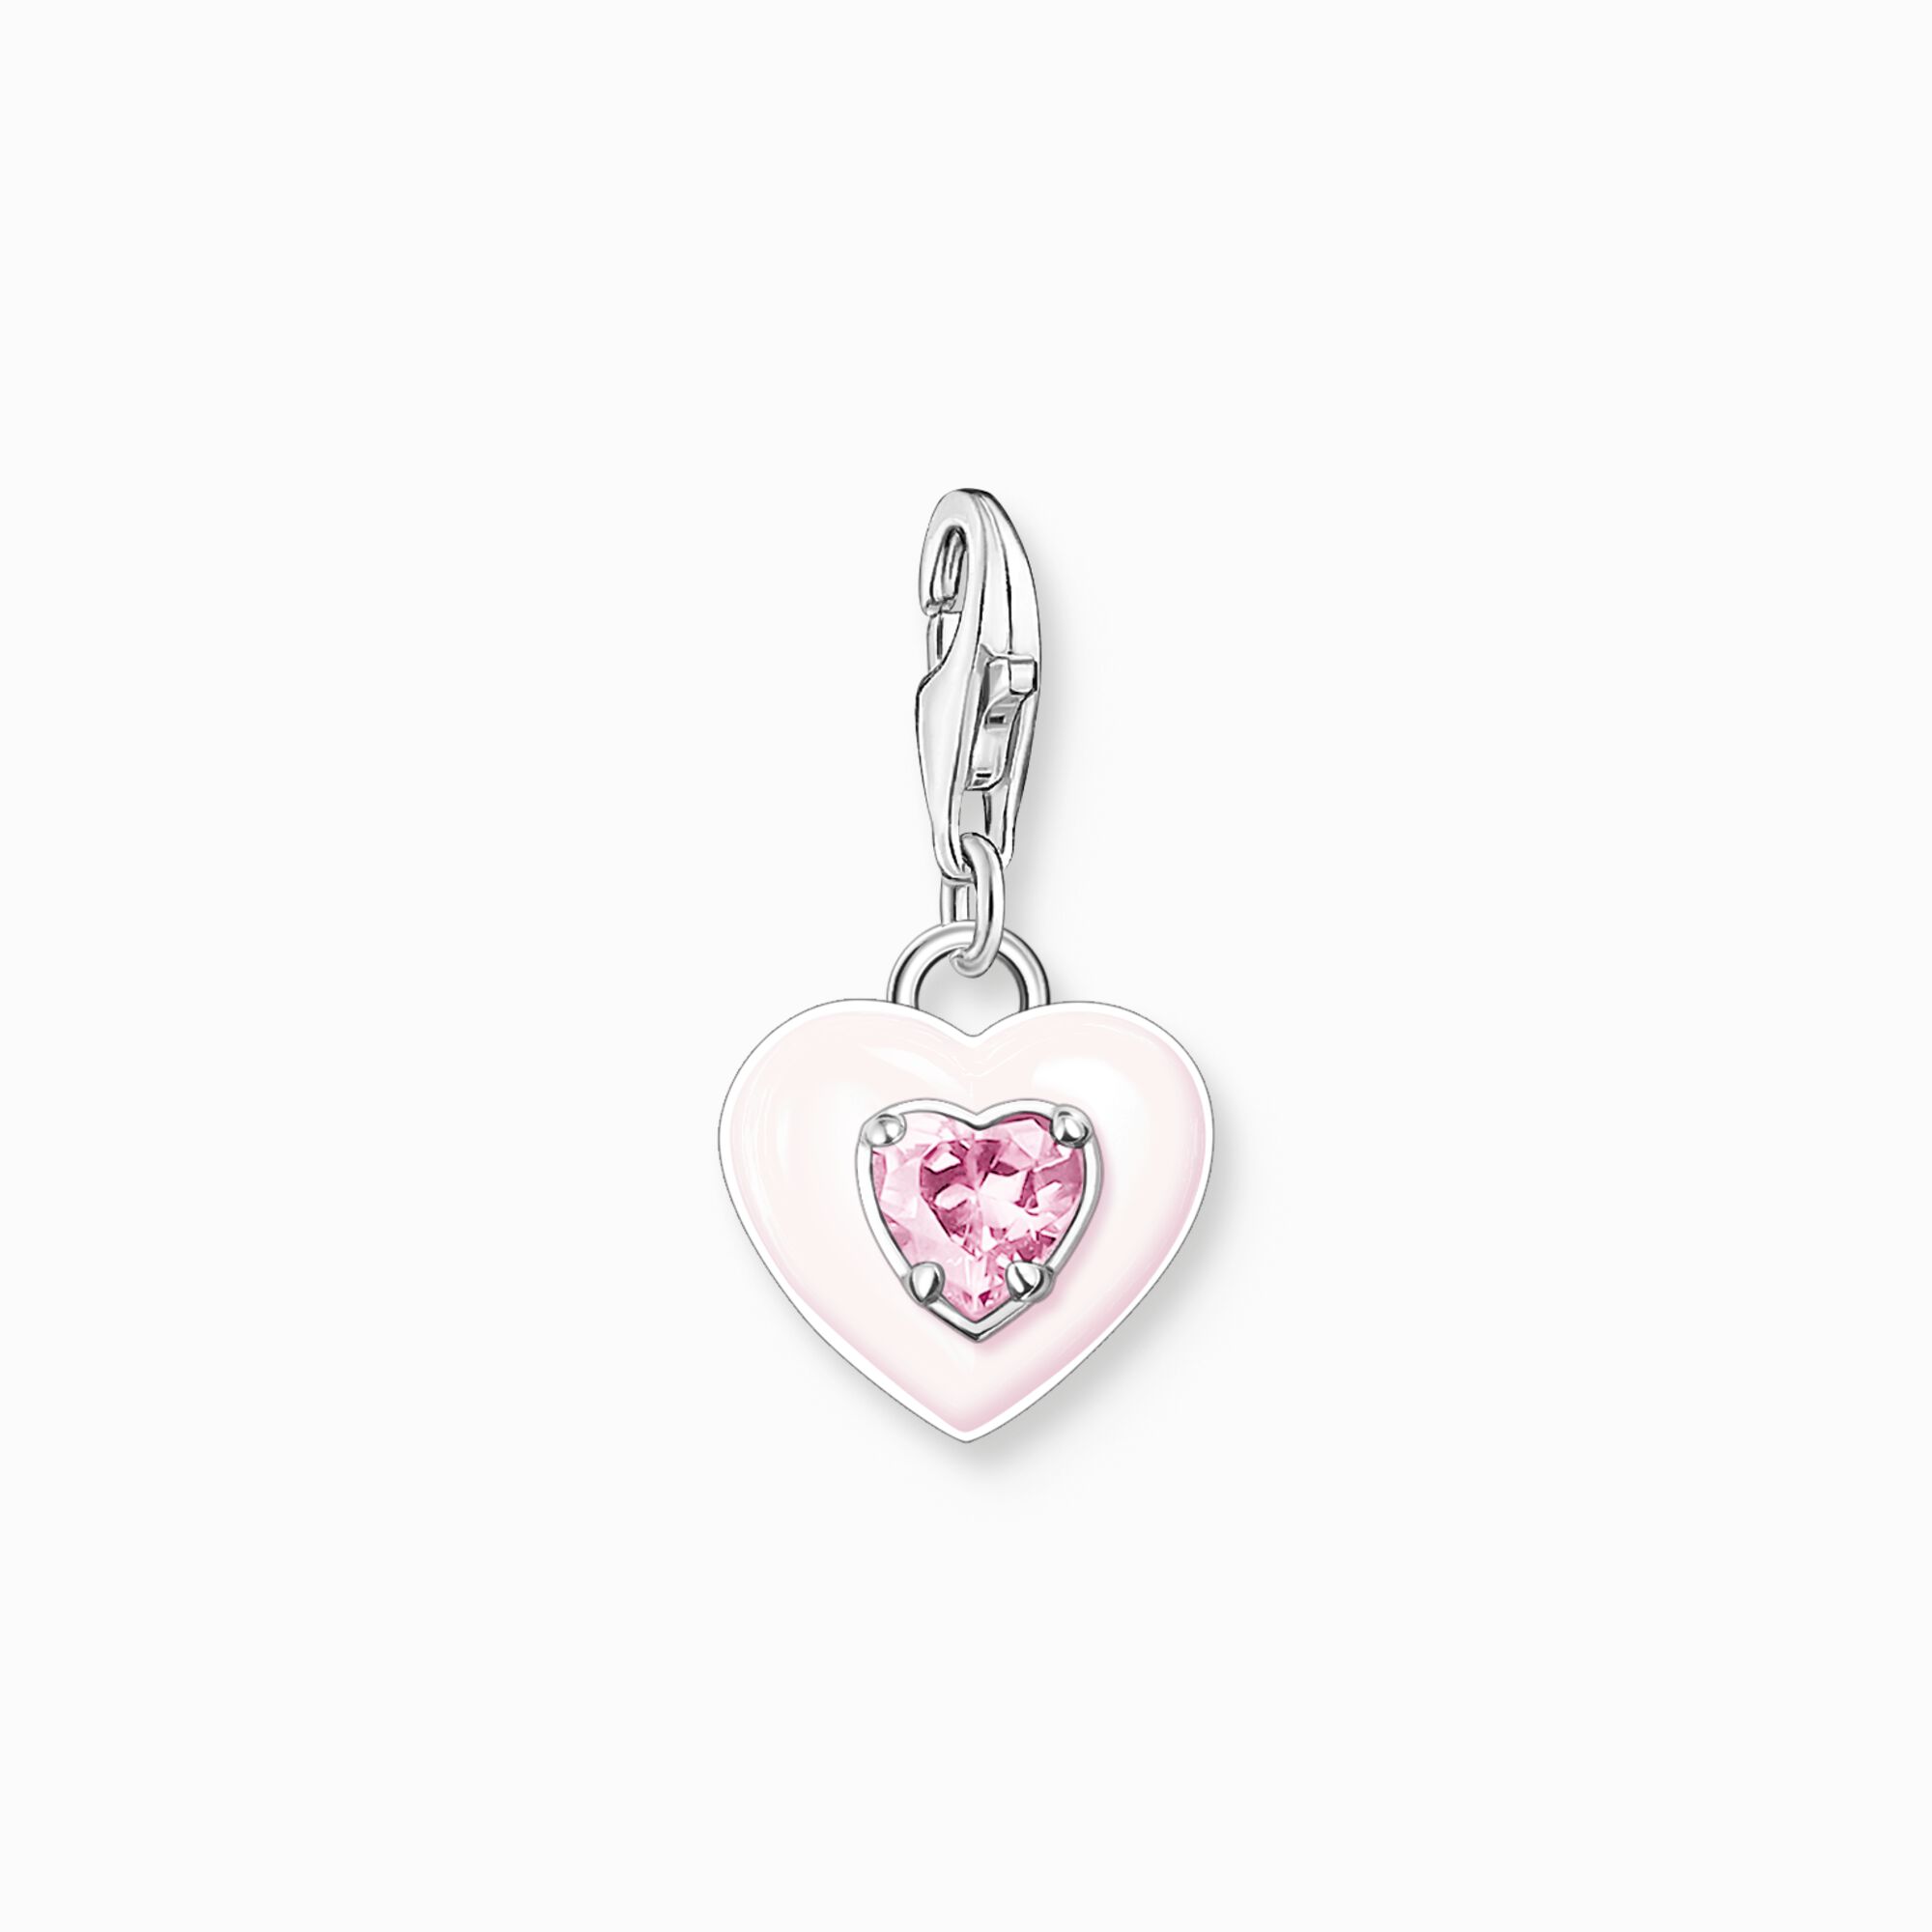 Charm pendant heart with pink stones silver from the Charm Club collection in the THOMAS SABO online store